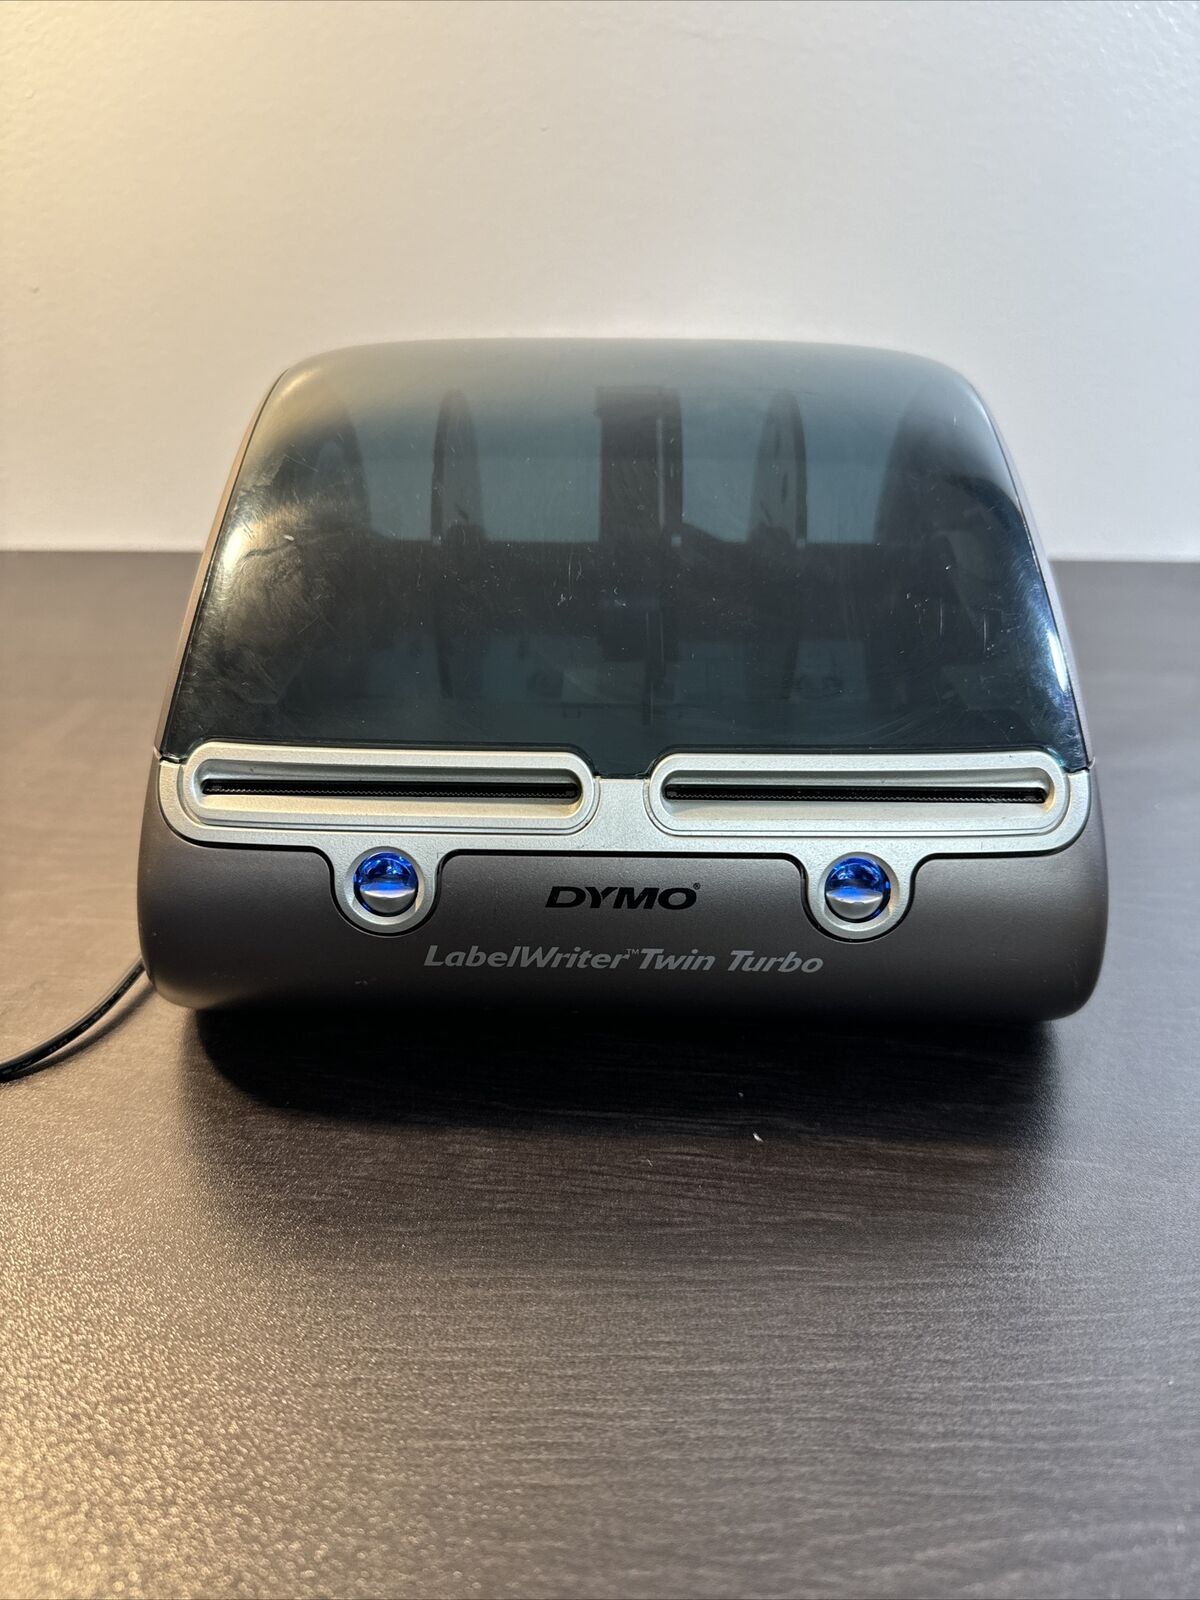 Dymo LabelWriter Twin Turbo USB Thermal Label Printer Used Great Condition